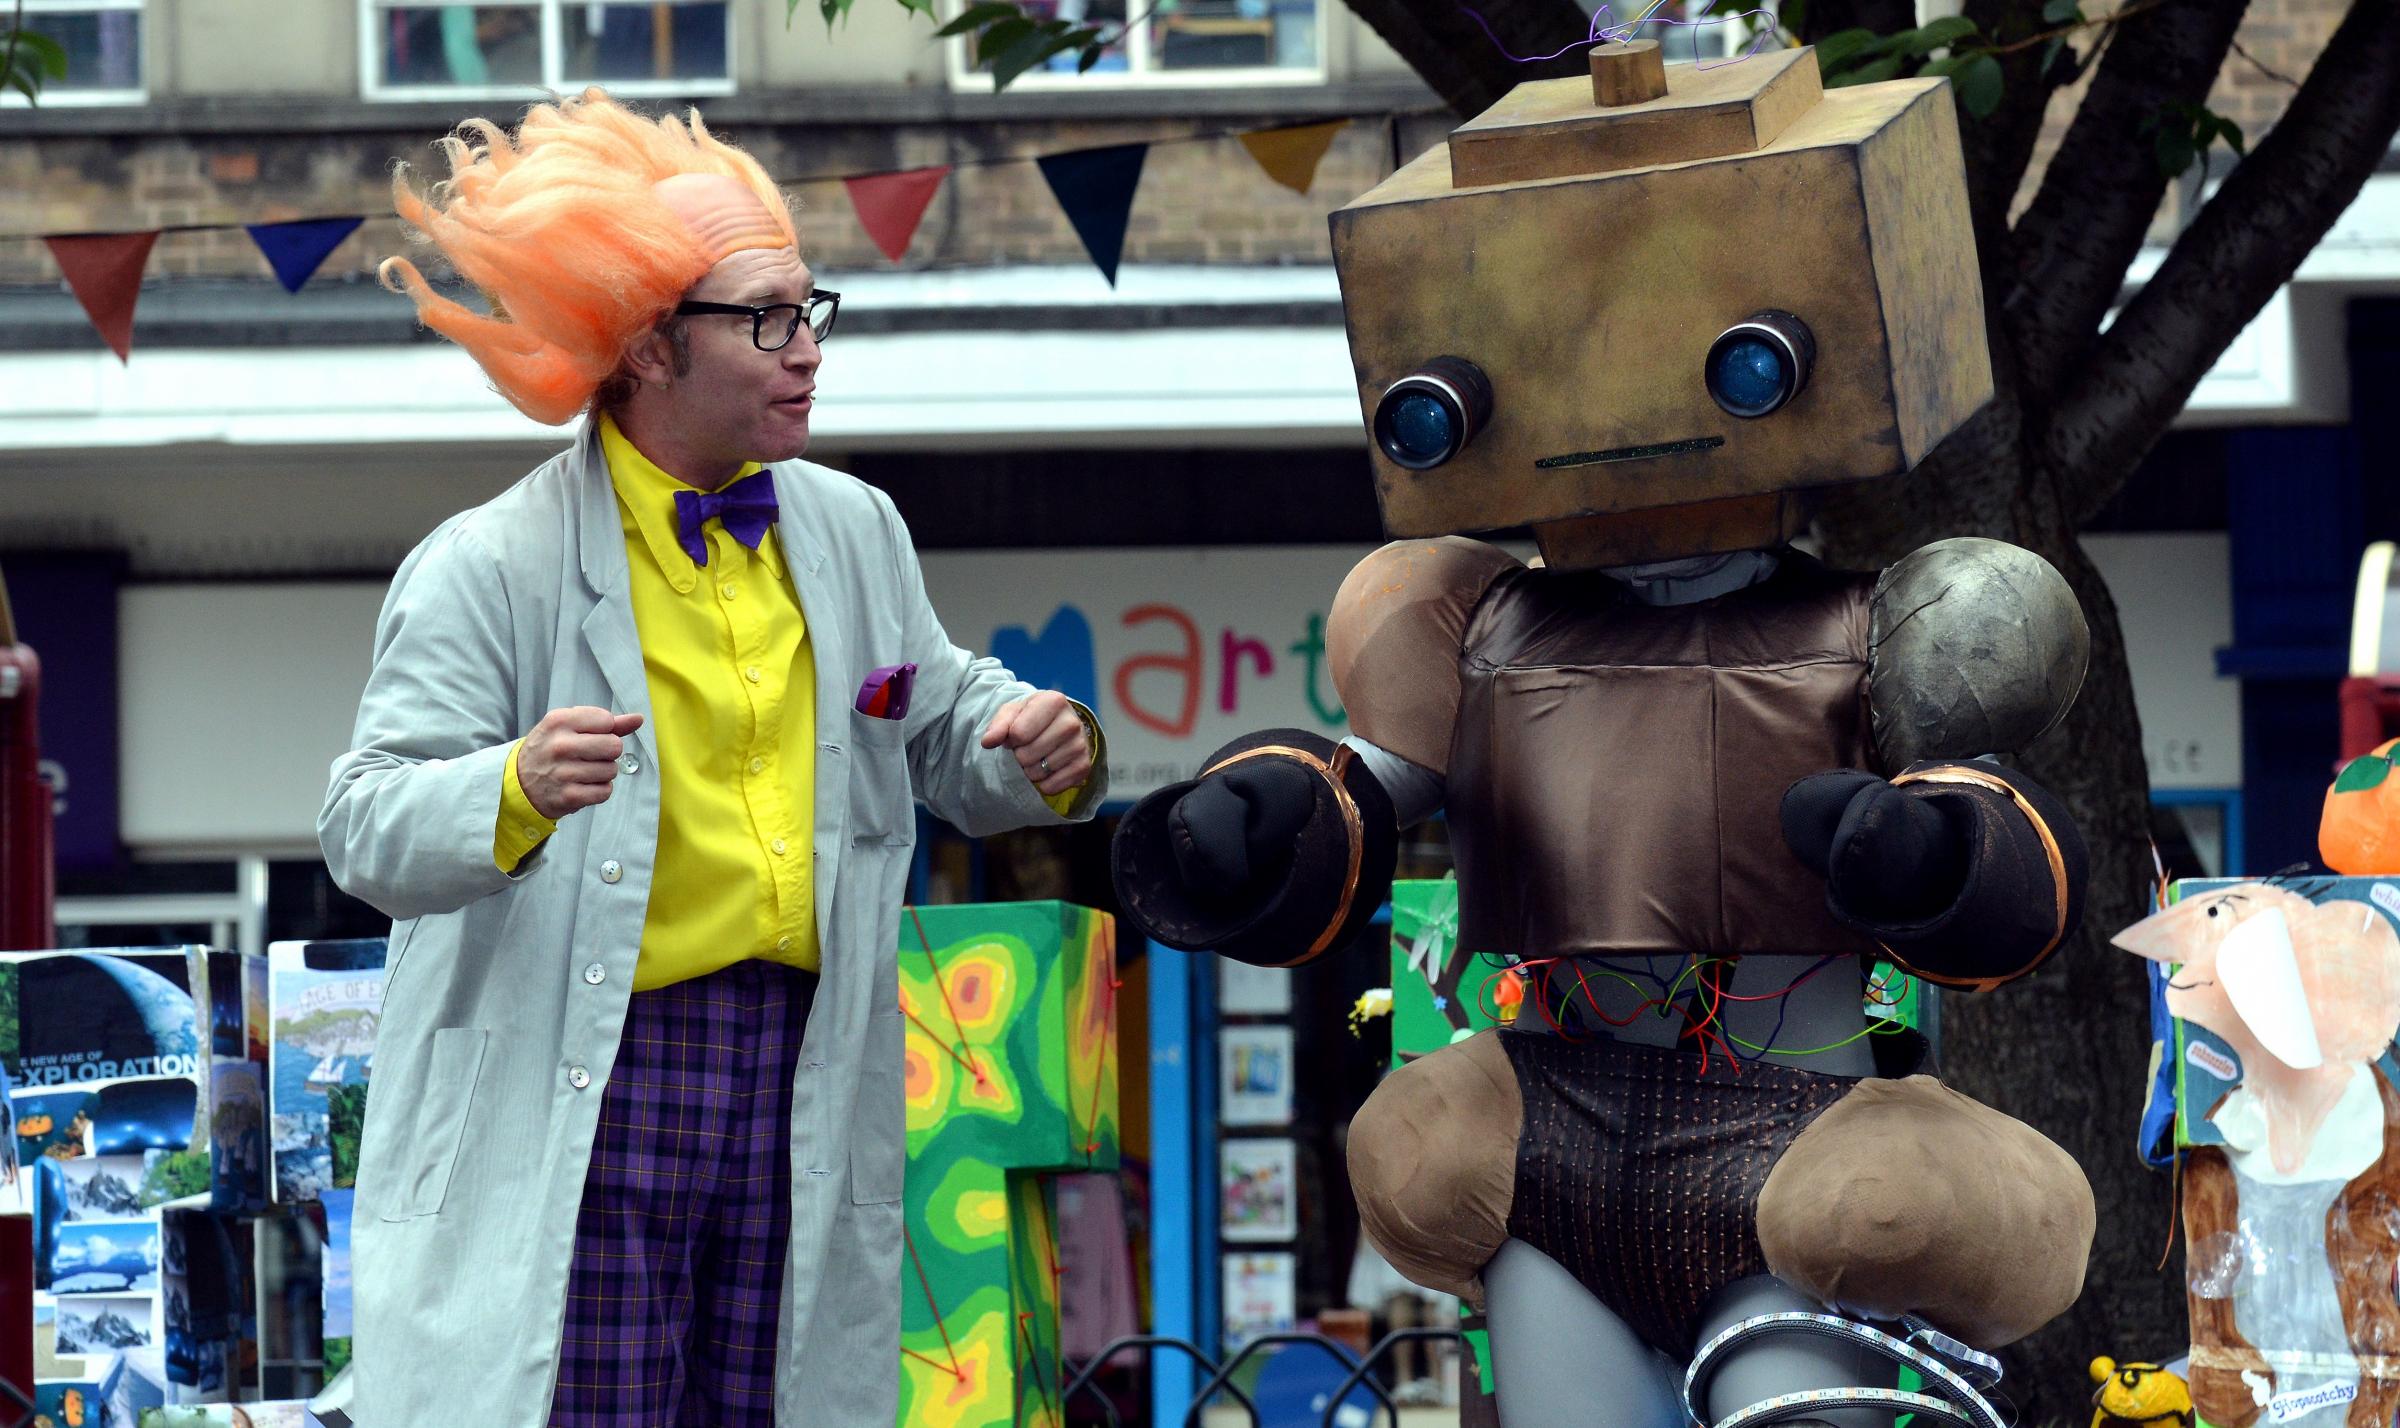 Bees, robots and strange creatures transform town centre into arts hub